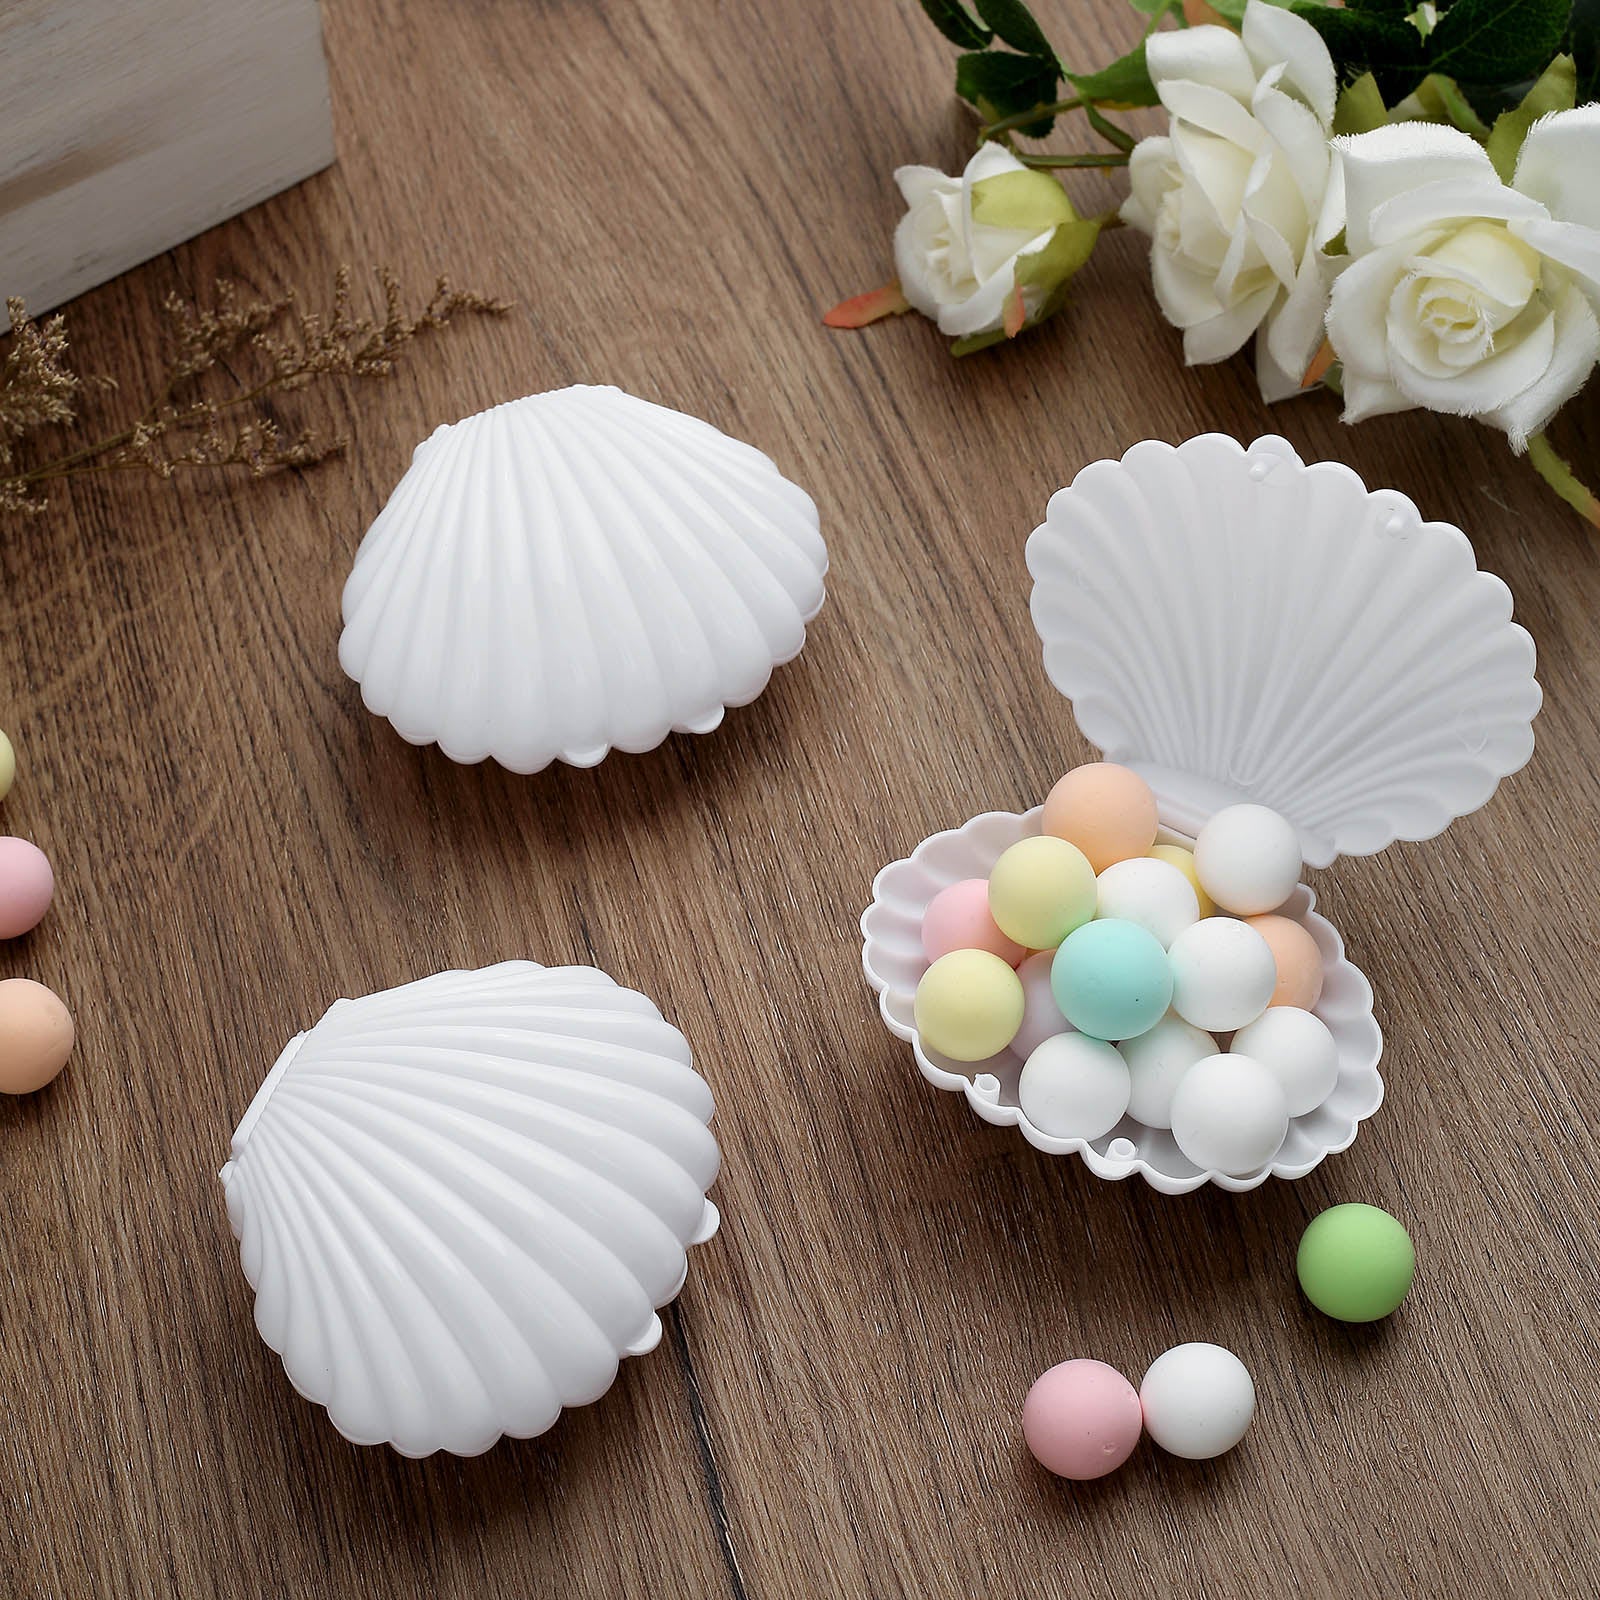 Seashell Beach Party Decorations Dinnerware - Beach Seashell Party  Supplies, Sea Shell Plates, Cups, Napkins, Sea Shell Party Tableware For  Birthday